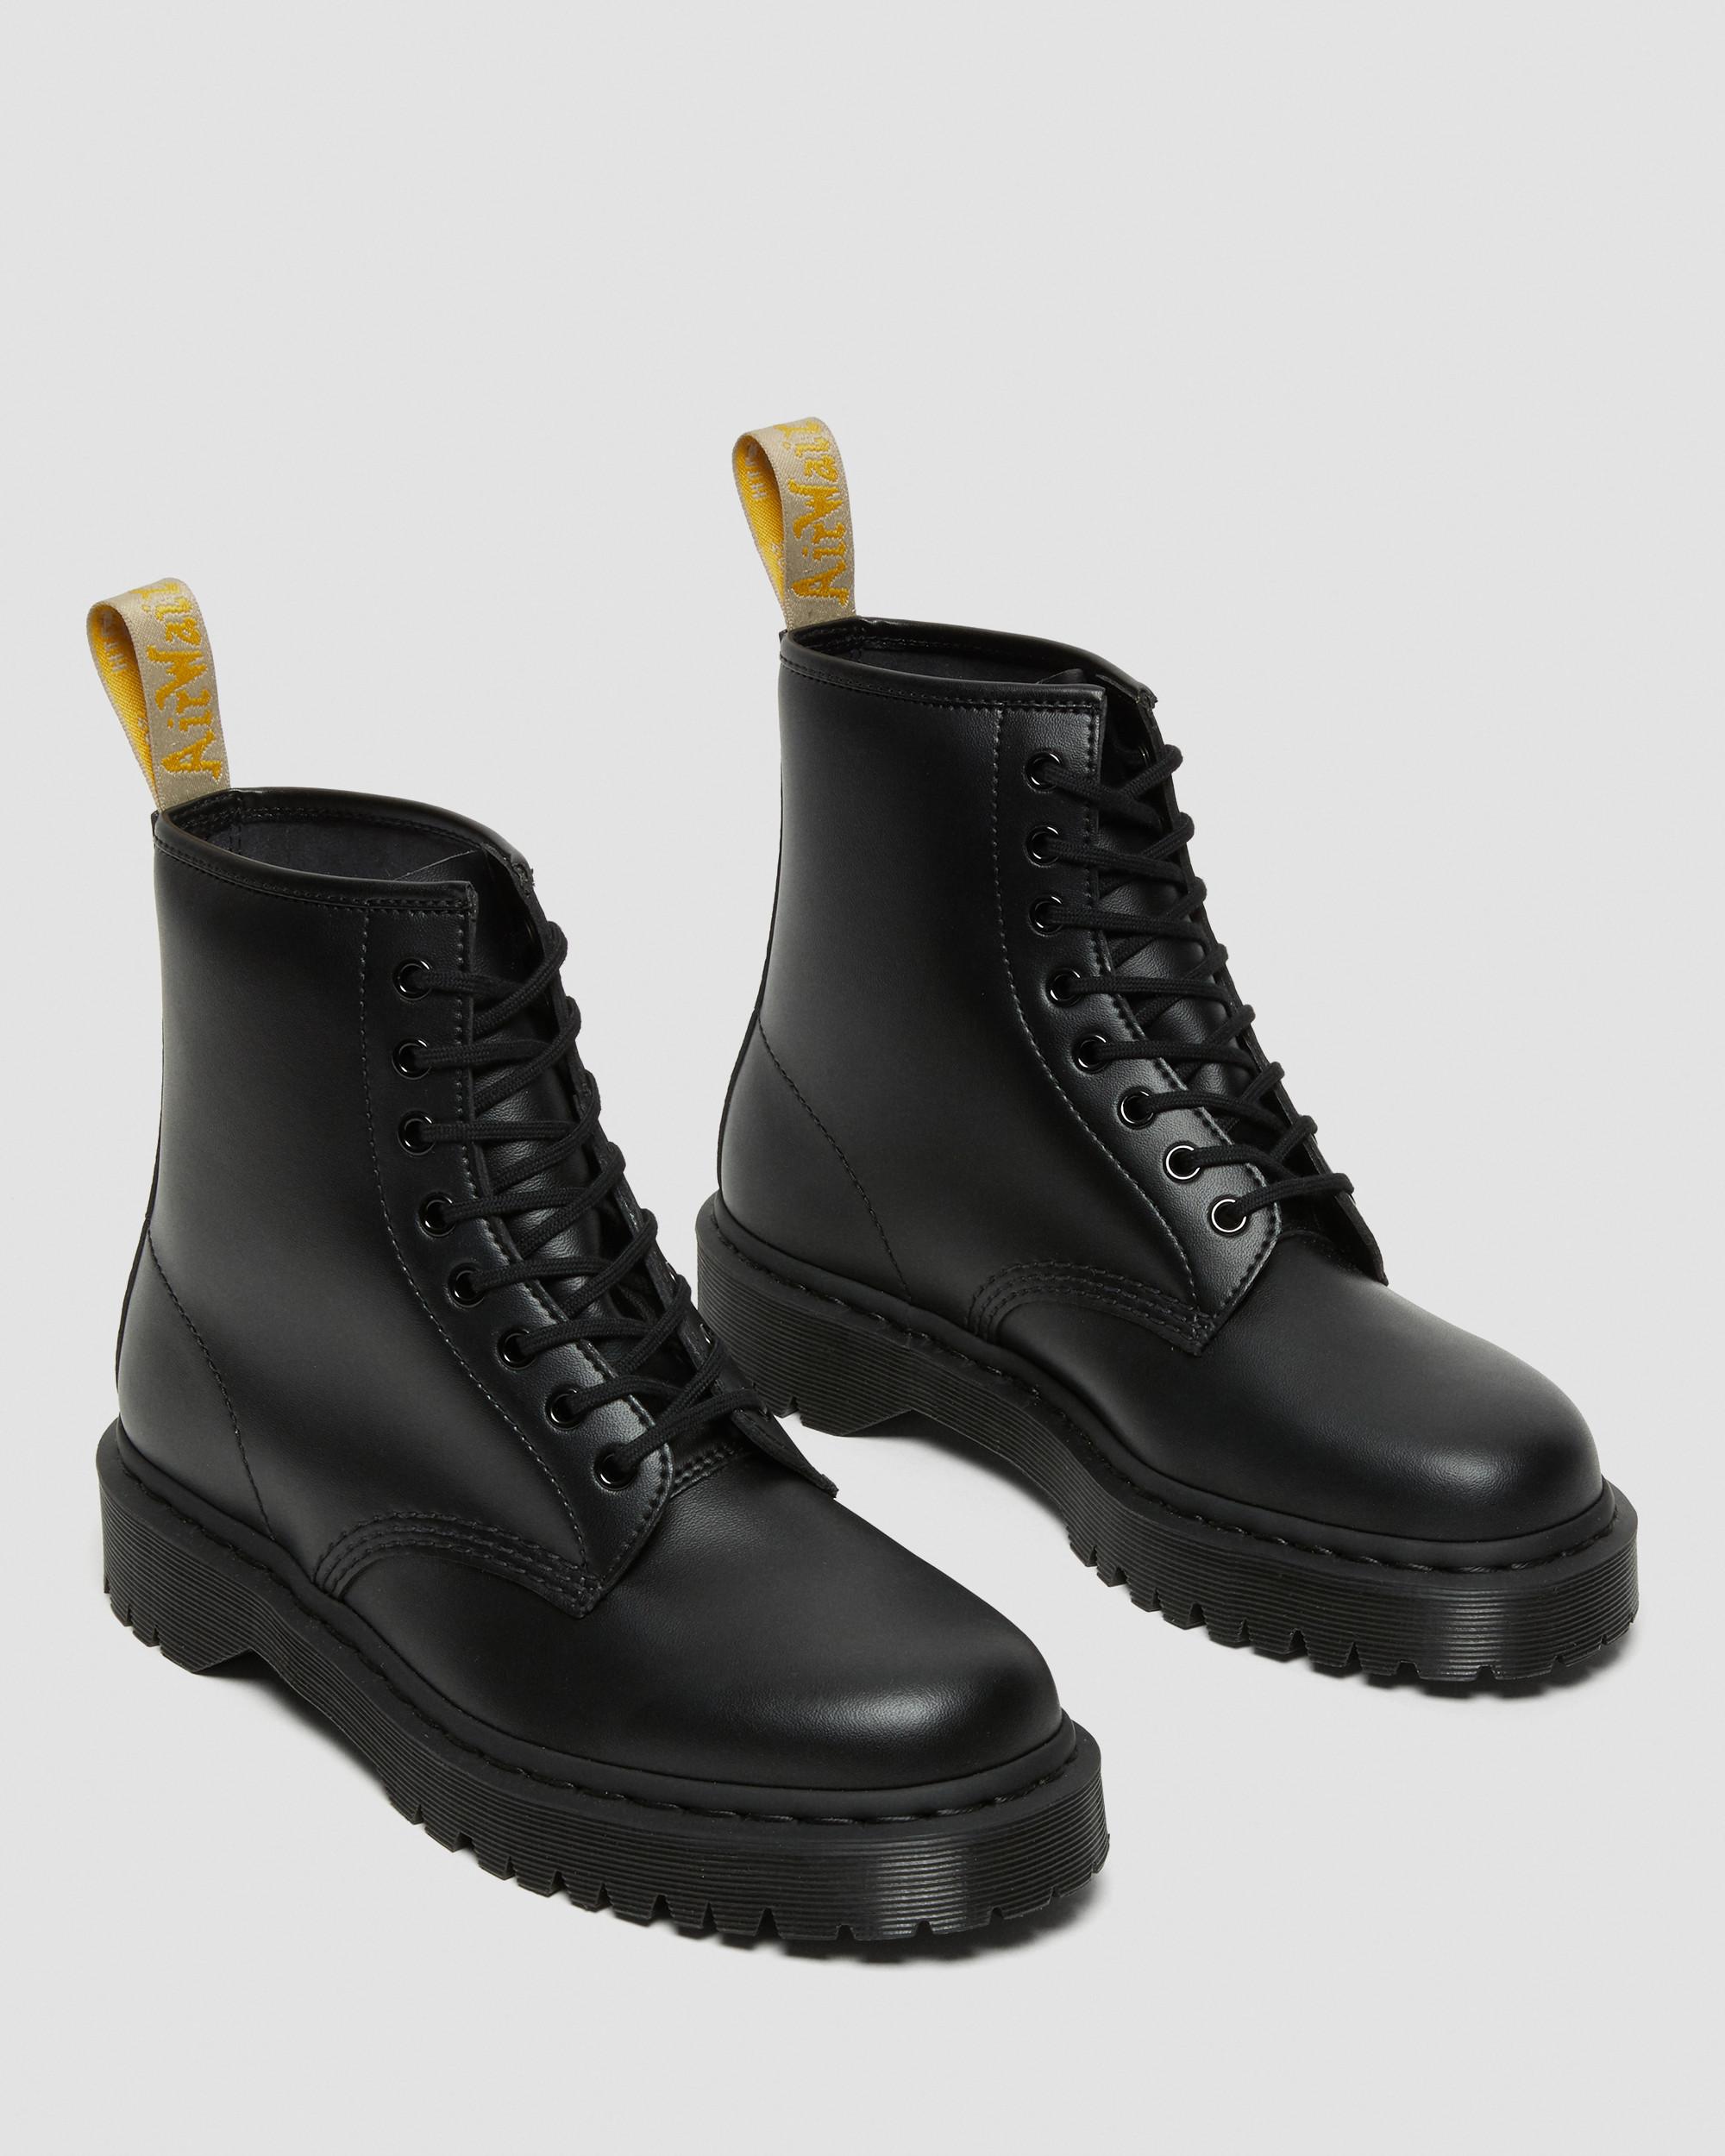 Vegan 1460 Bex Mono Lace Up Boots in Black | Dr. Martens